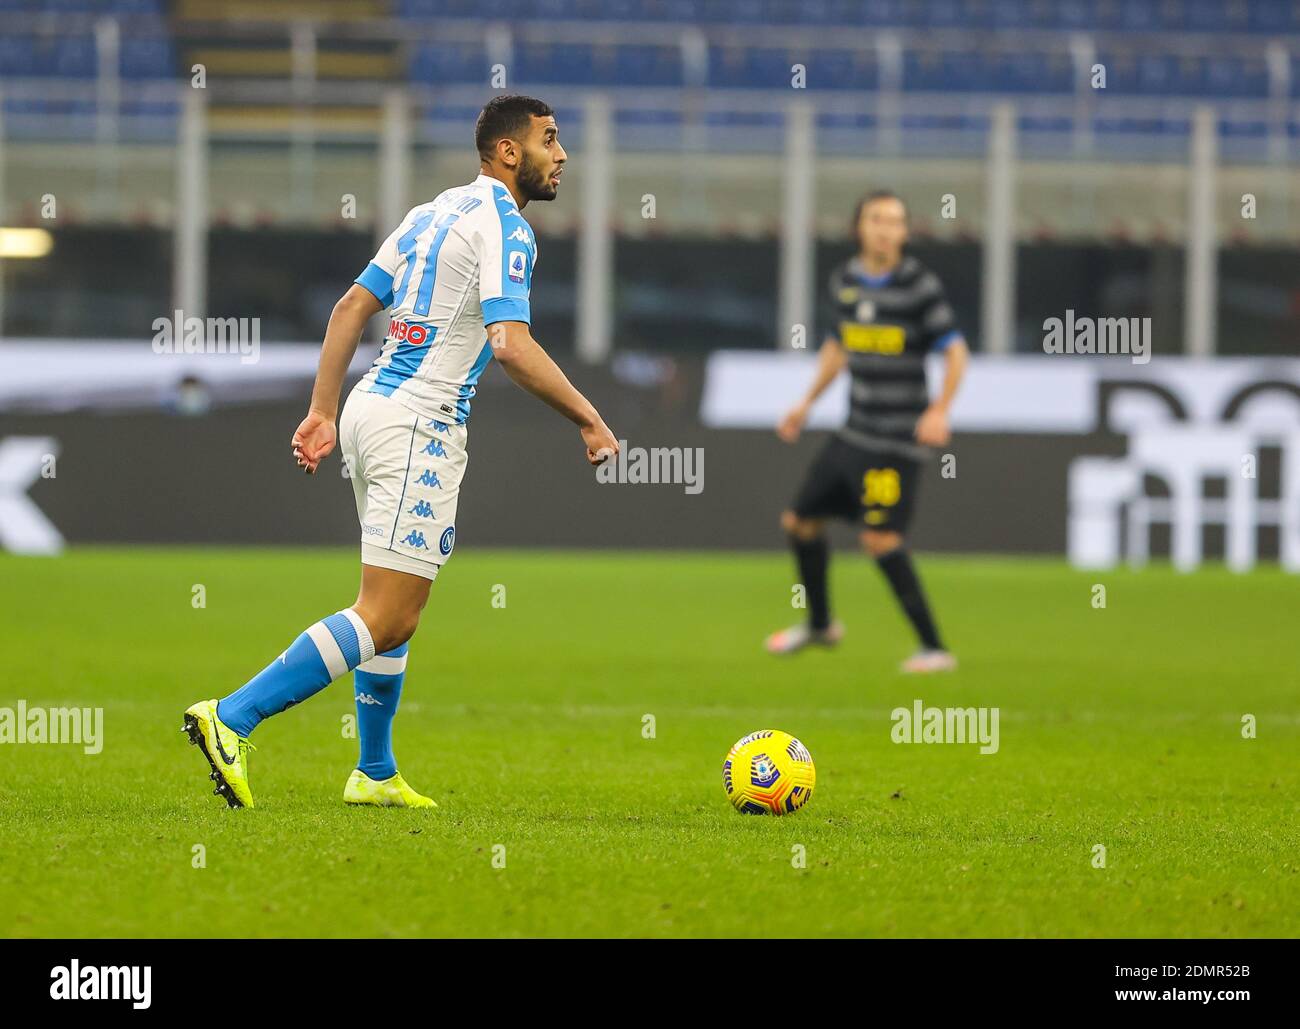 December 16, 2020, Milan, Italy: Faouzi Ghoulam of SSC Napoli during the Serie A 2020/21 football match between FC Internazionale vs SSC Napoli at the San Siro Stadium, Milan, Italy on December 16, 2020 - Photo FCI / Fabrizio Carabelli / LM (Credit Image: © Fabrizio Carabelli/LPS via ZUMA Wire) Stock Photo